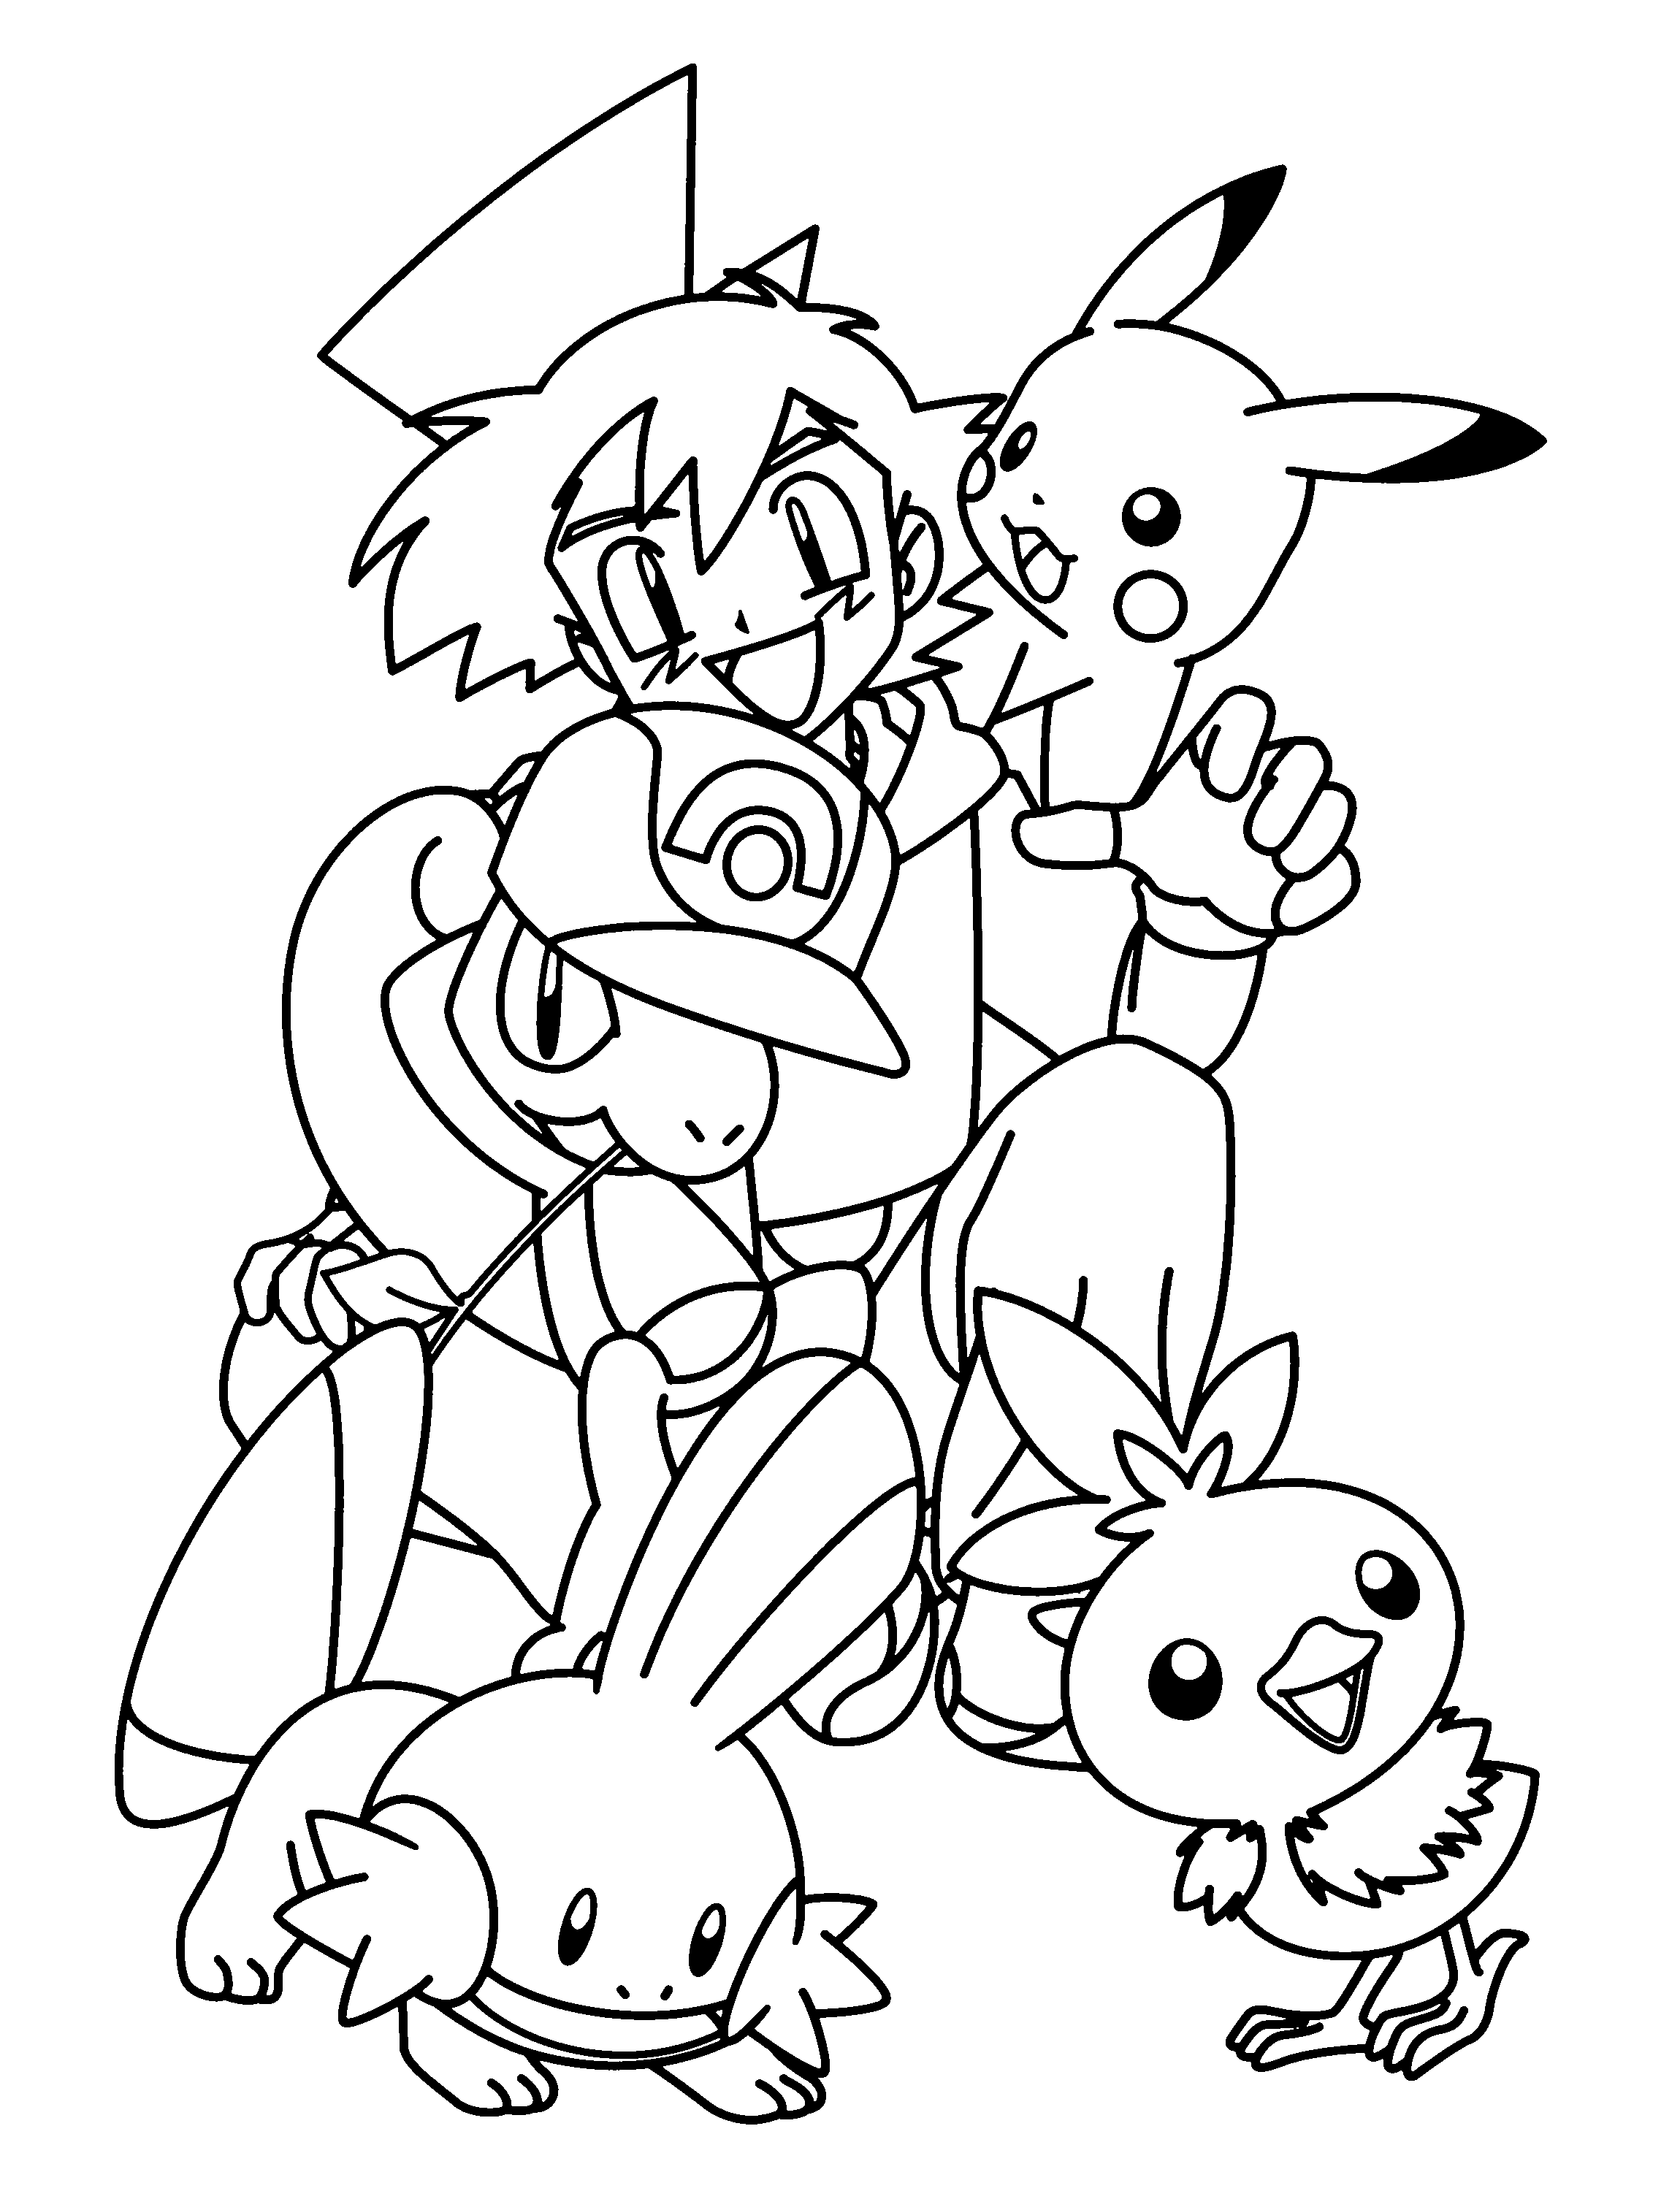 Pokemon Black And White - Coloring Pages for Kids and for Adults